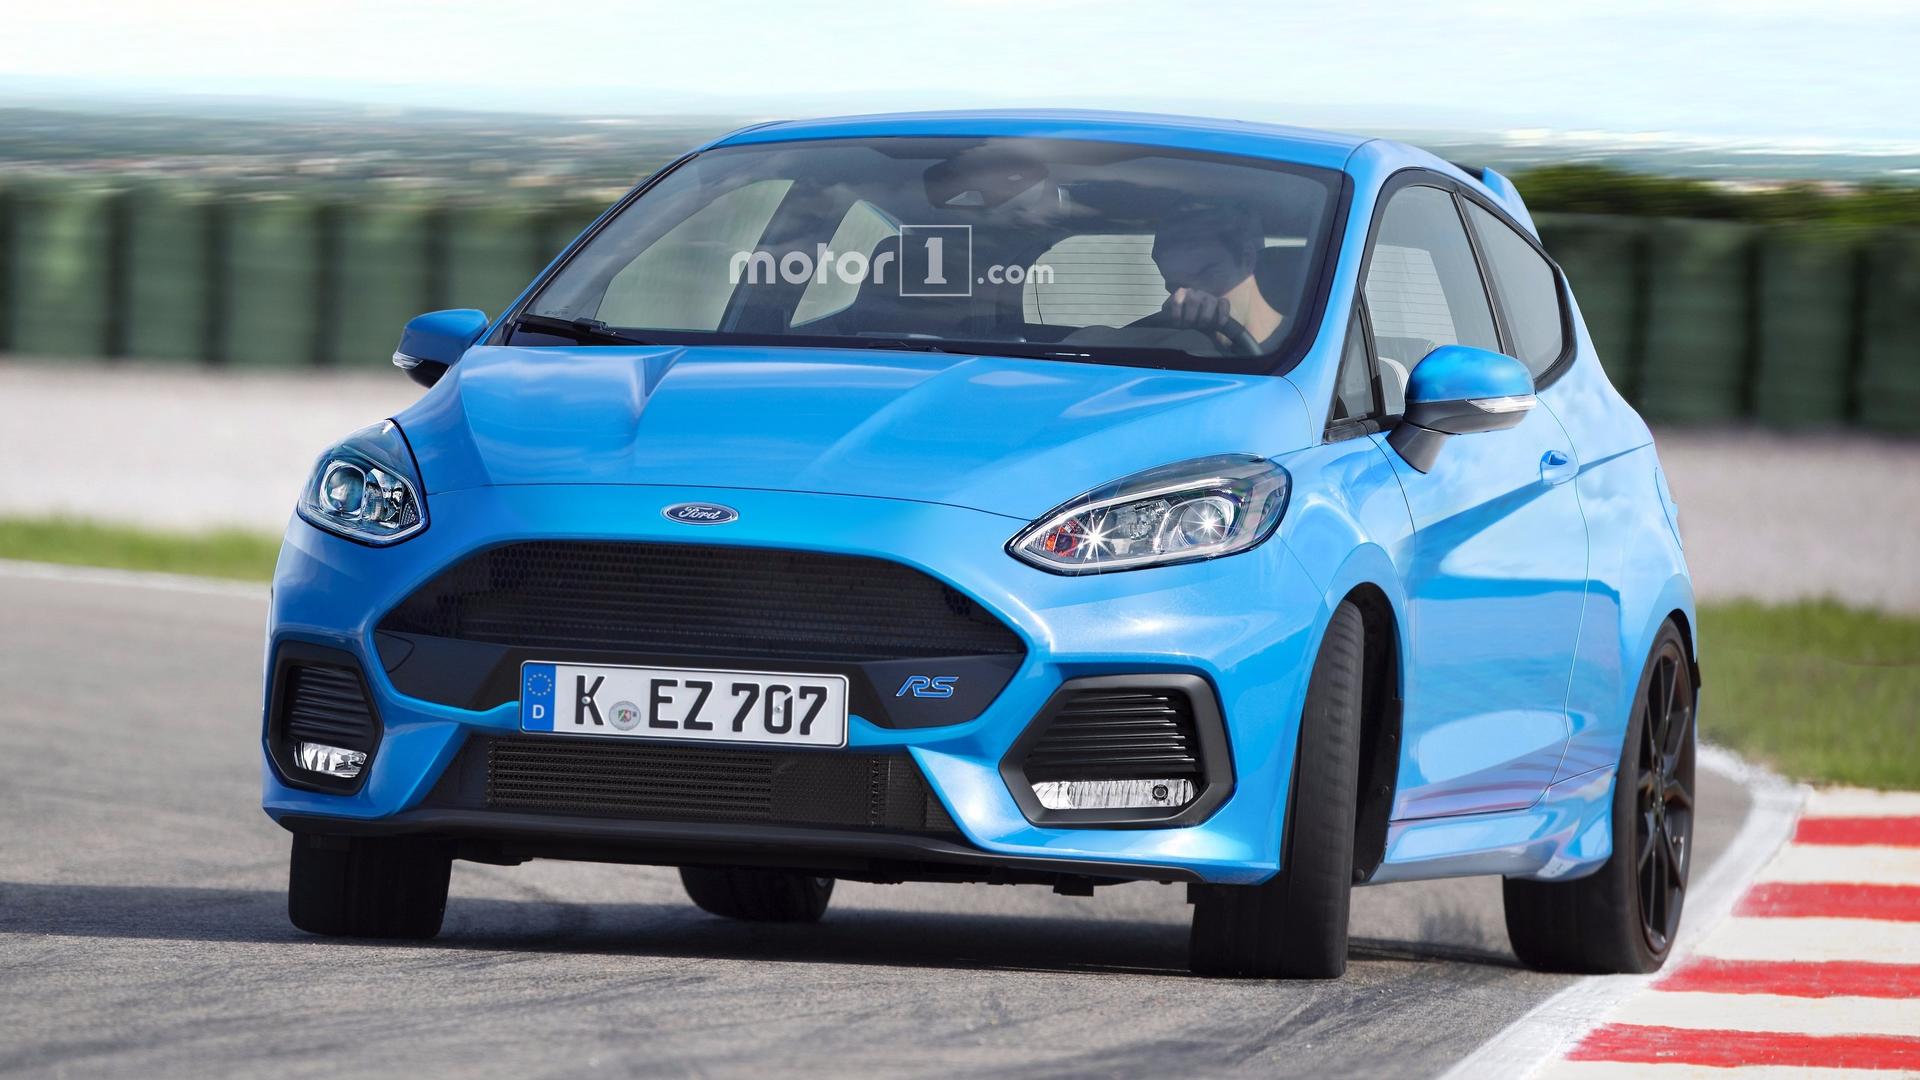 Imagining What Ford Won't Build, The Fiesta RS